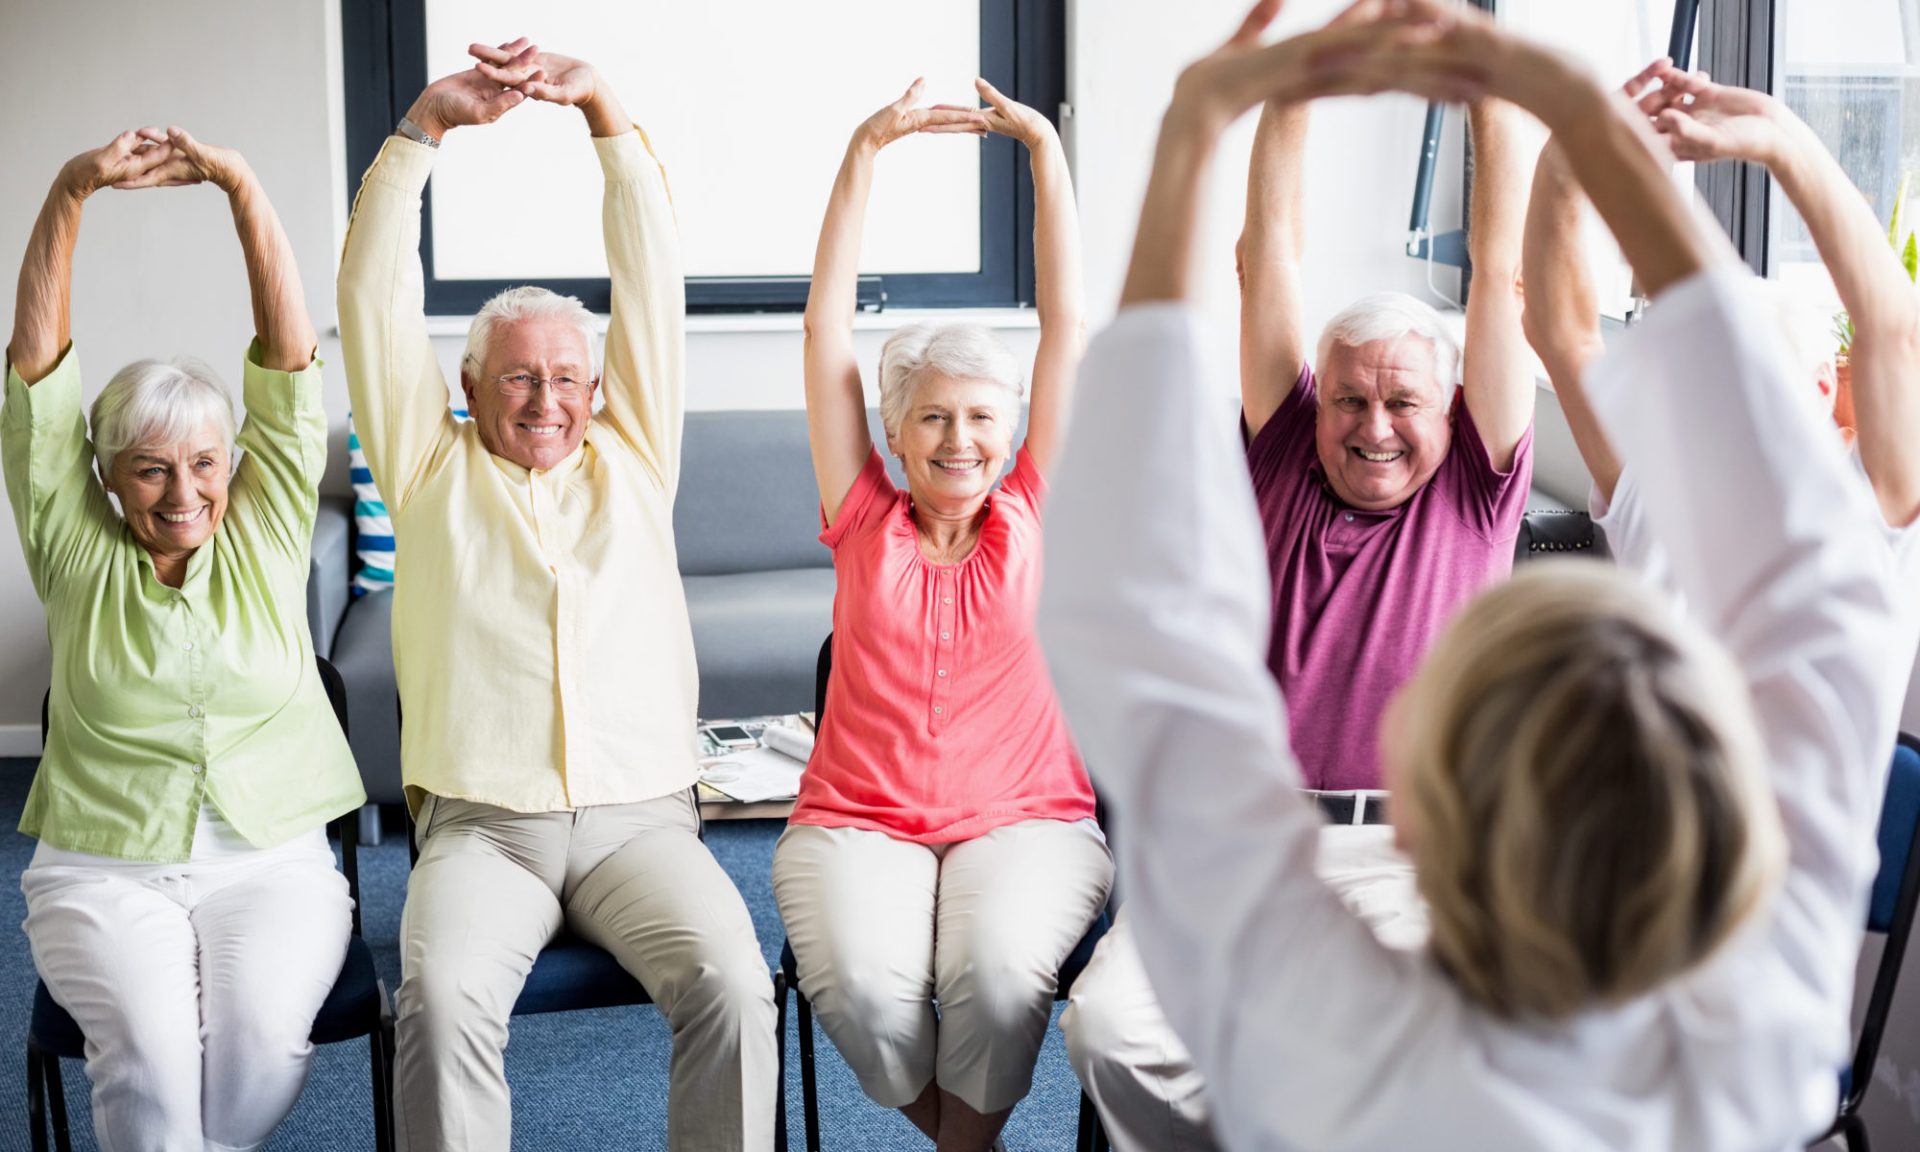 Yoga For Aging